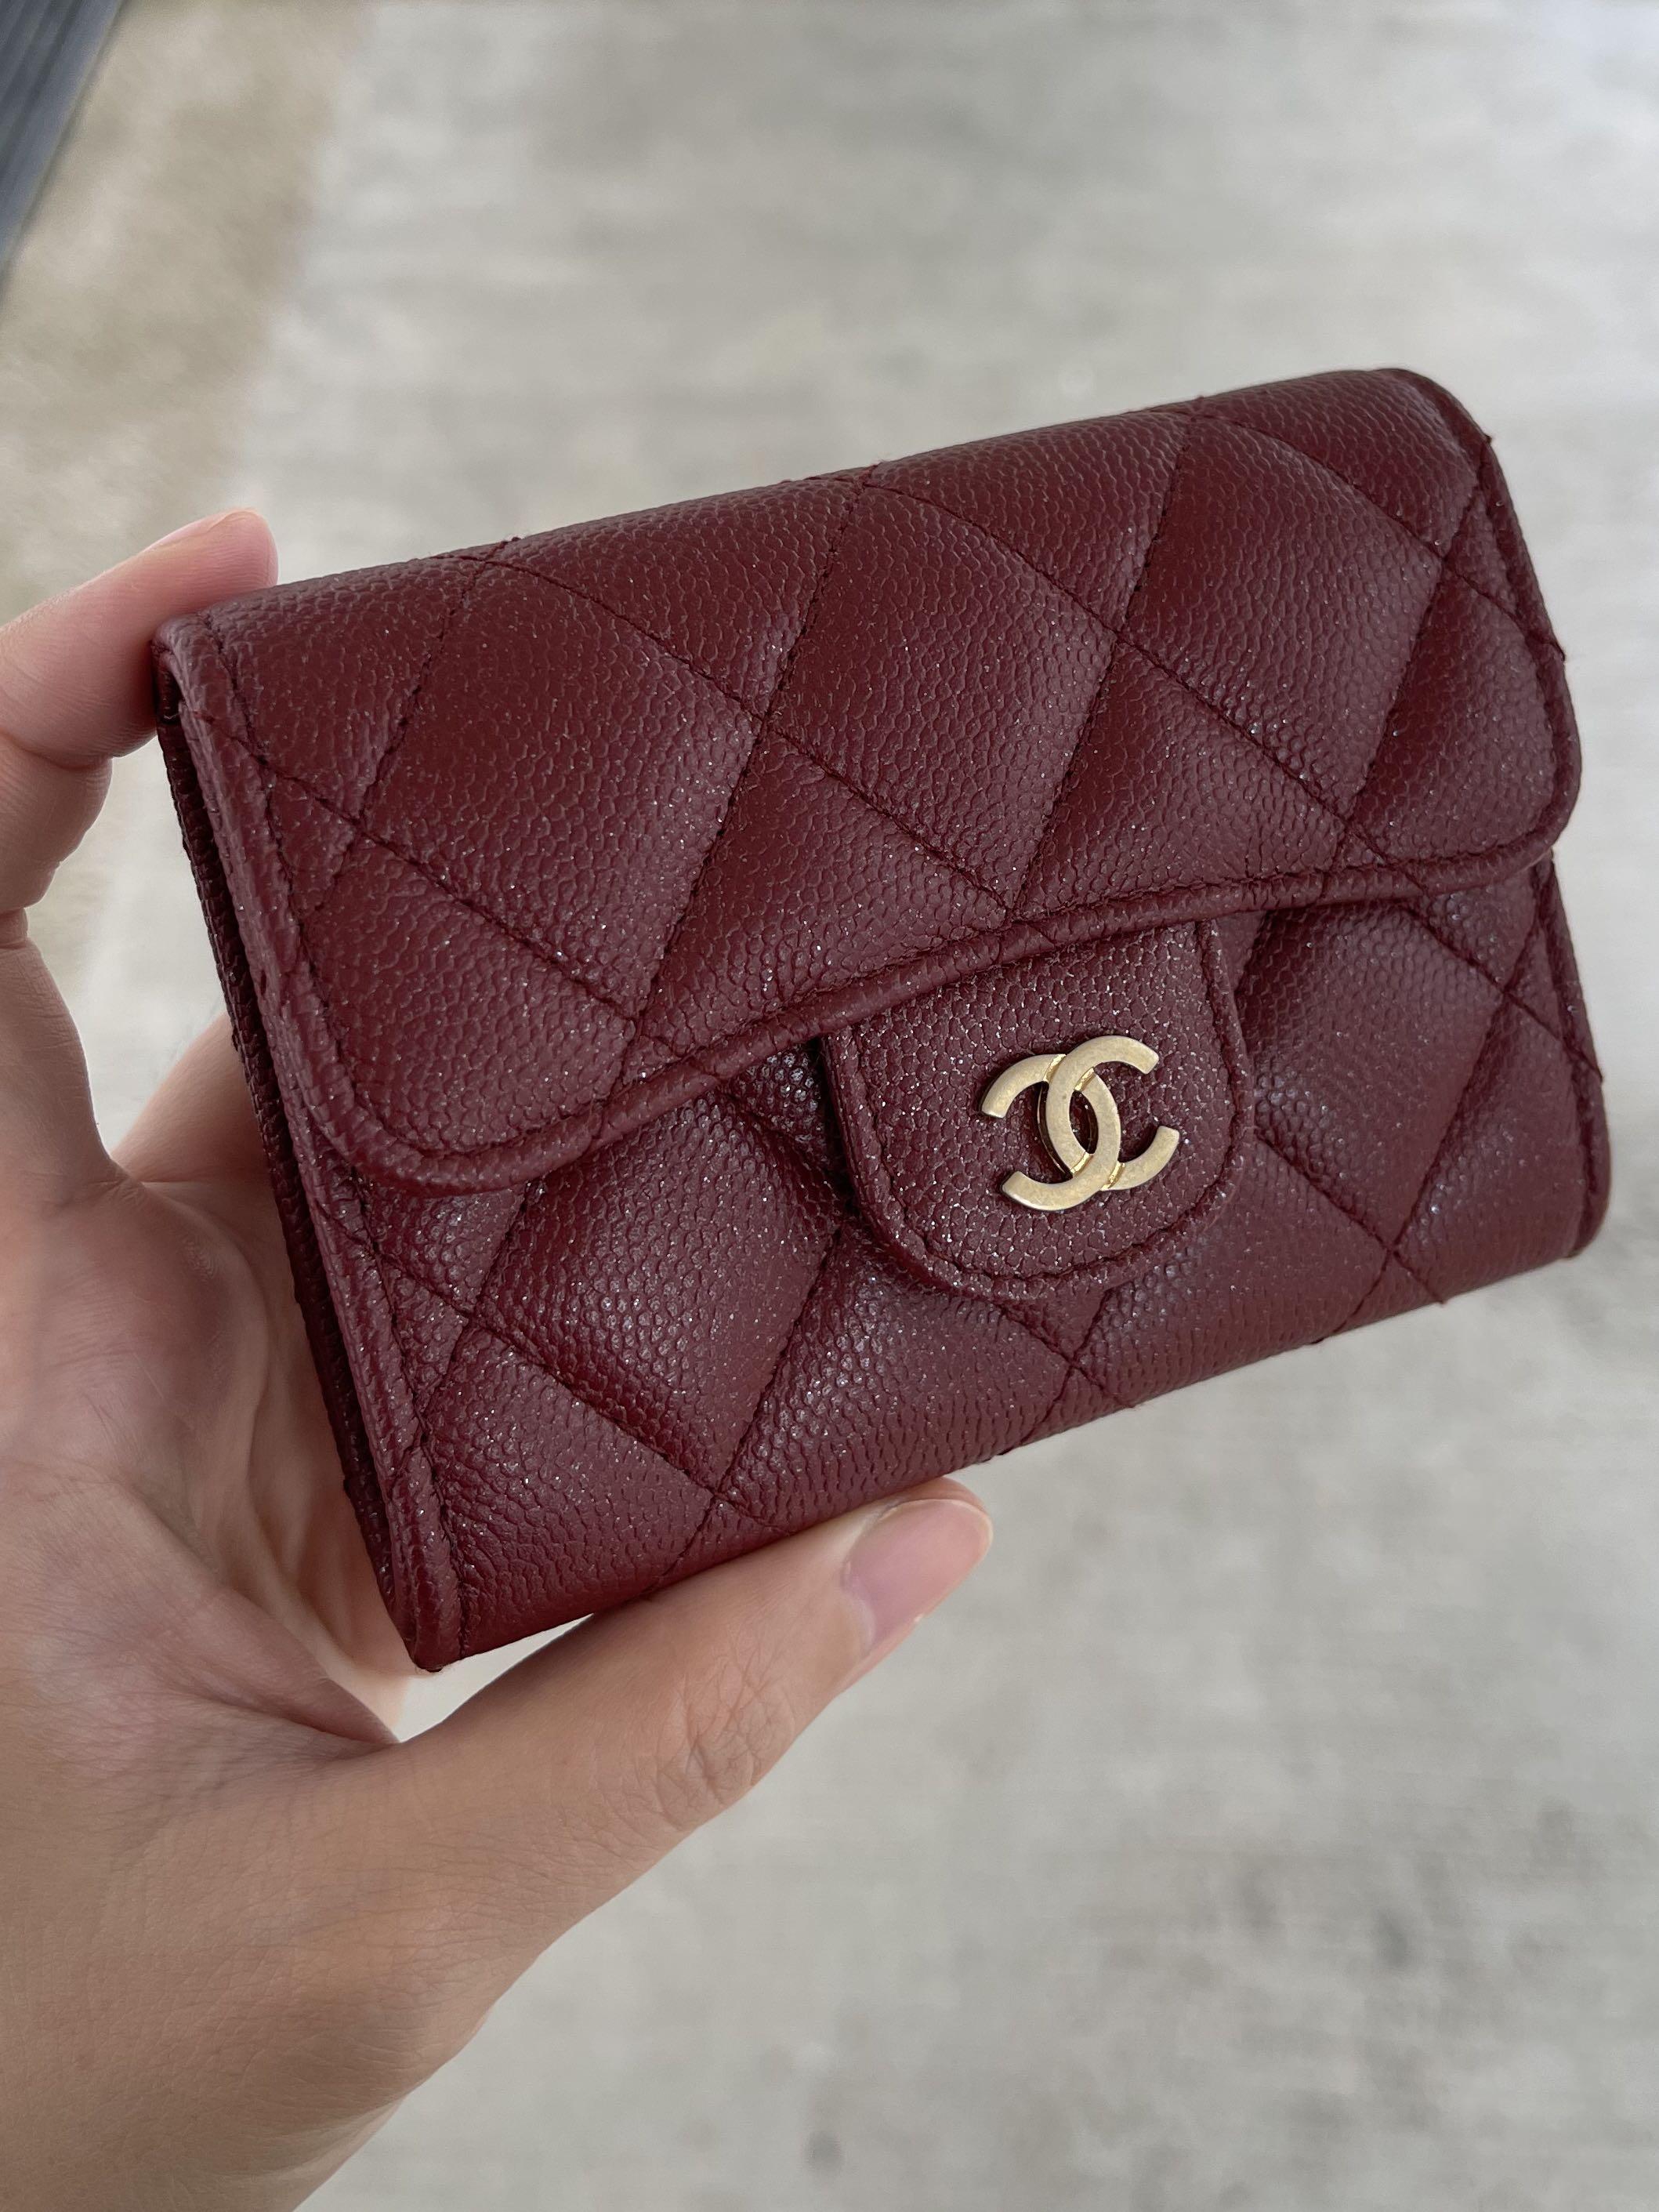 A Quick Guide to Chanel Serial Numbers - Couture USA